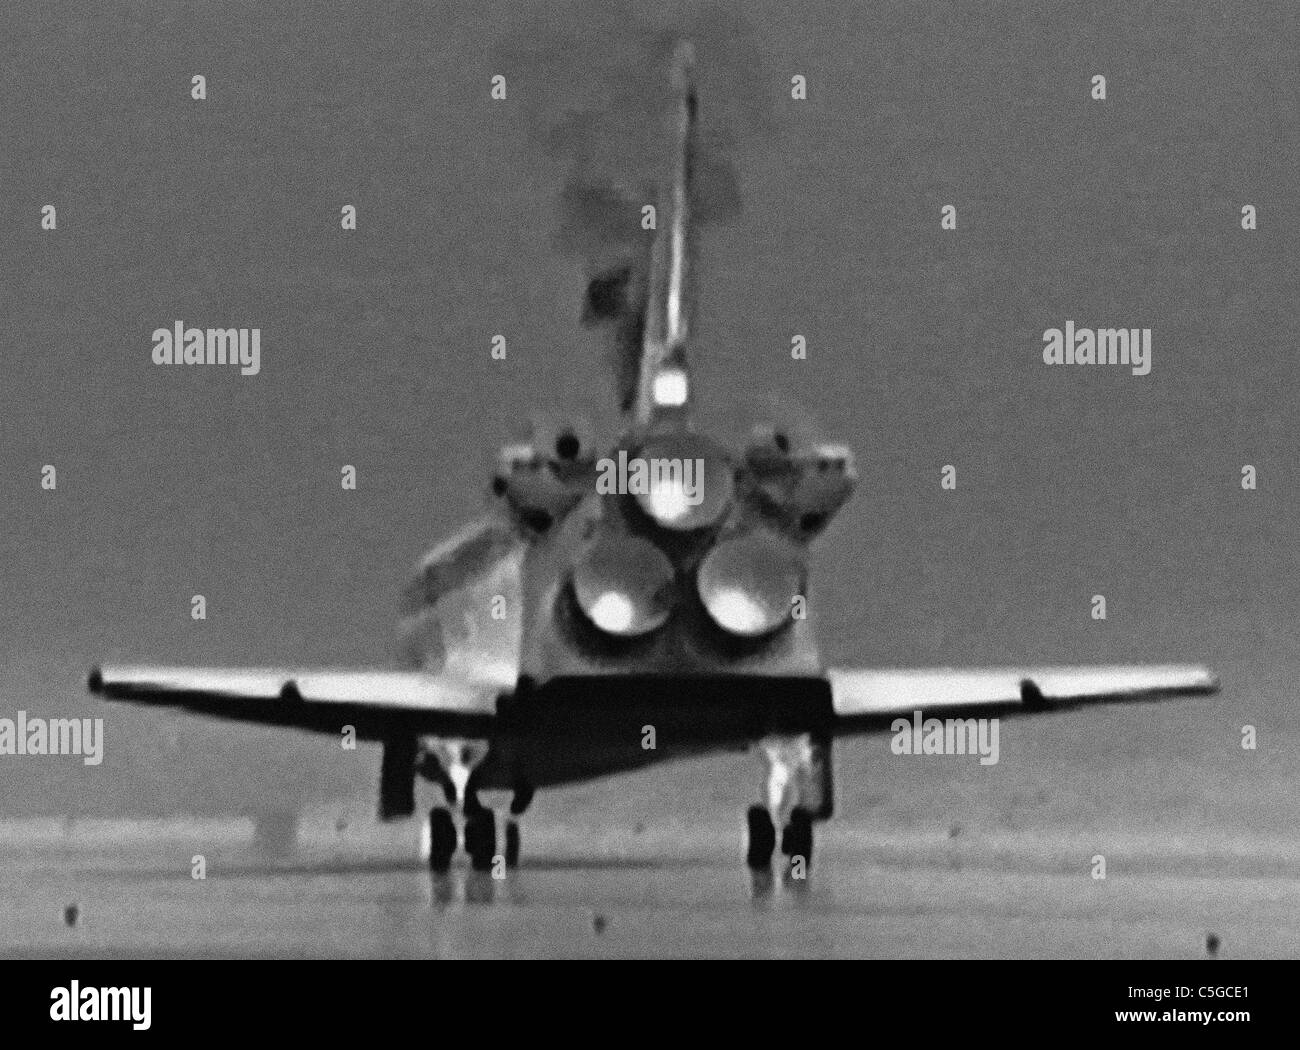 Atlantis returns - touchdown thermal image inverted to provide positive - last space shuttle lands NASA IMAGE Stock Photo